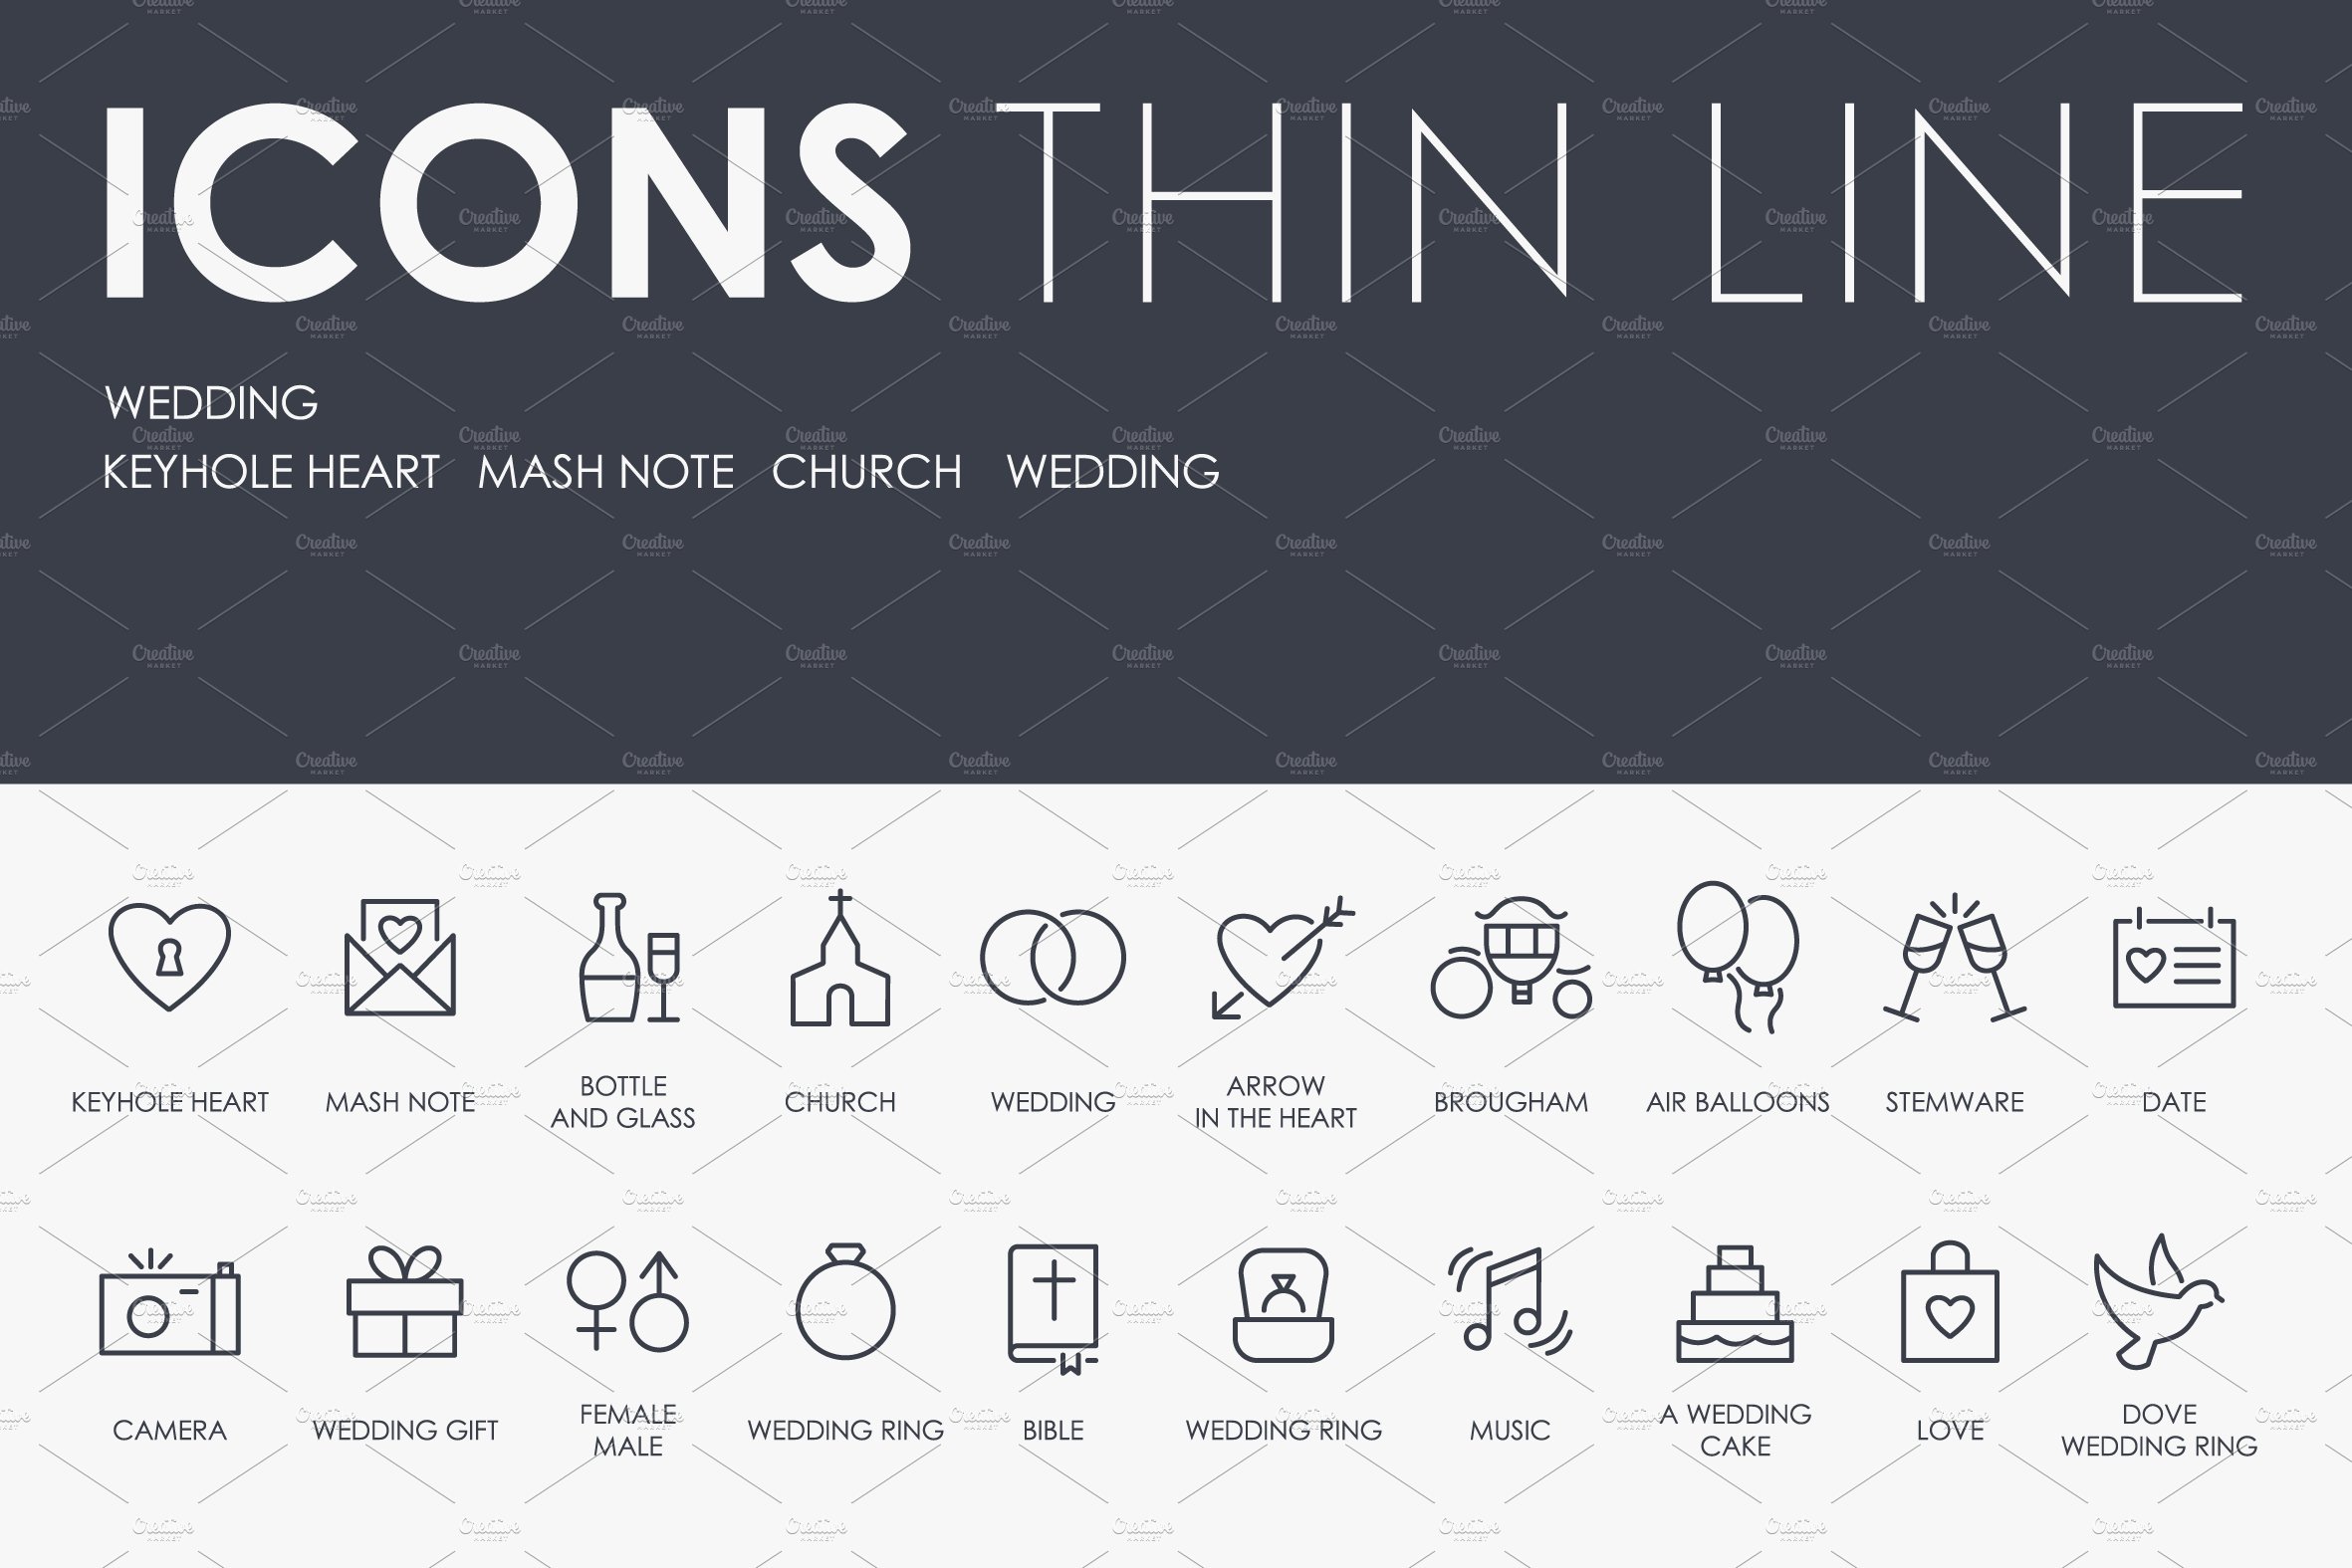 Wedding thinline icons cover image.